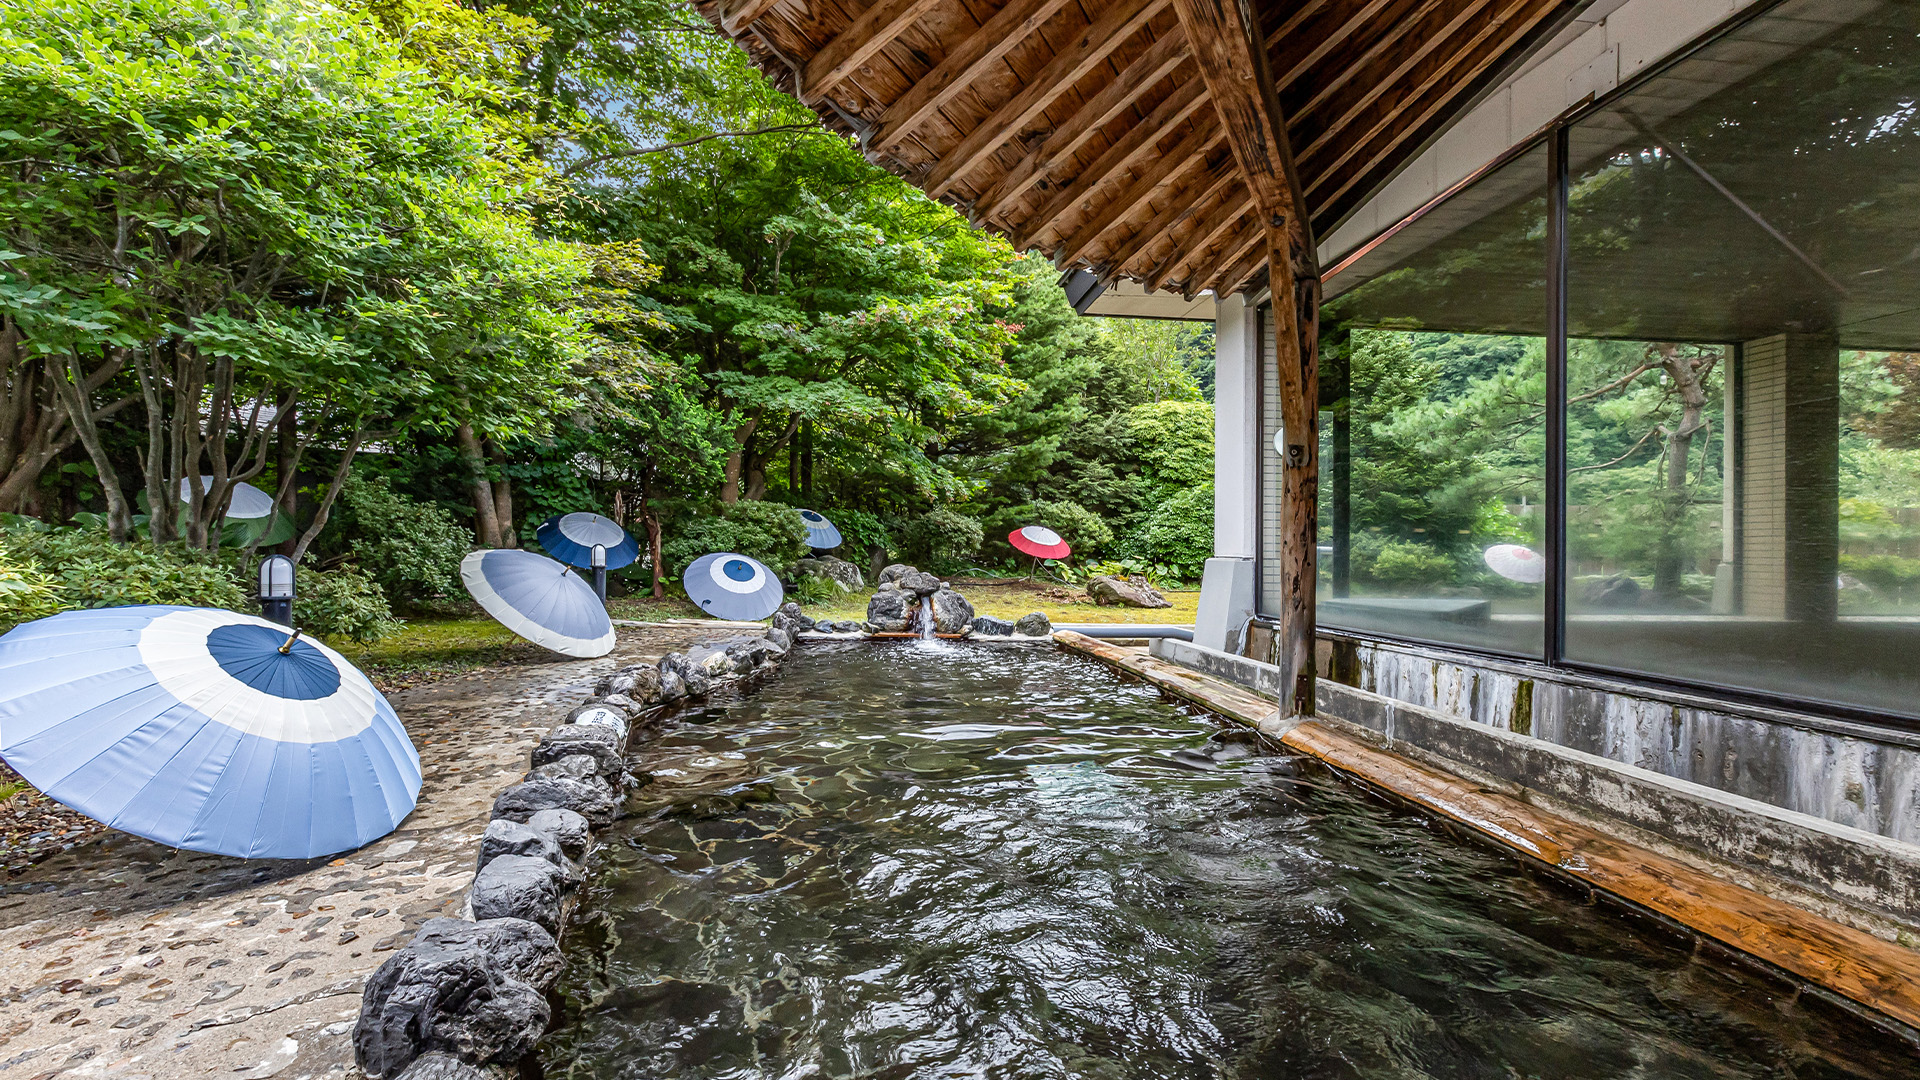 Yuze Hot springs one of the most beautiful hot springs in Tohoku